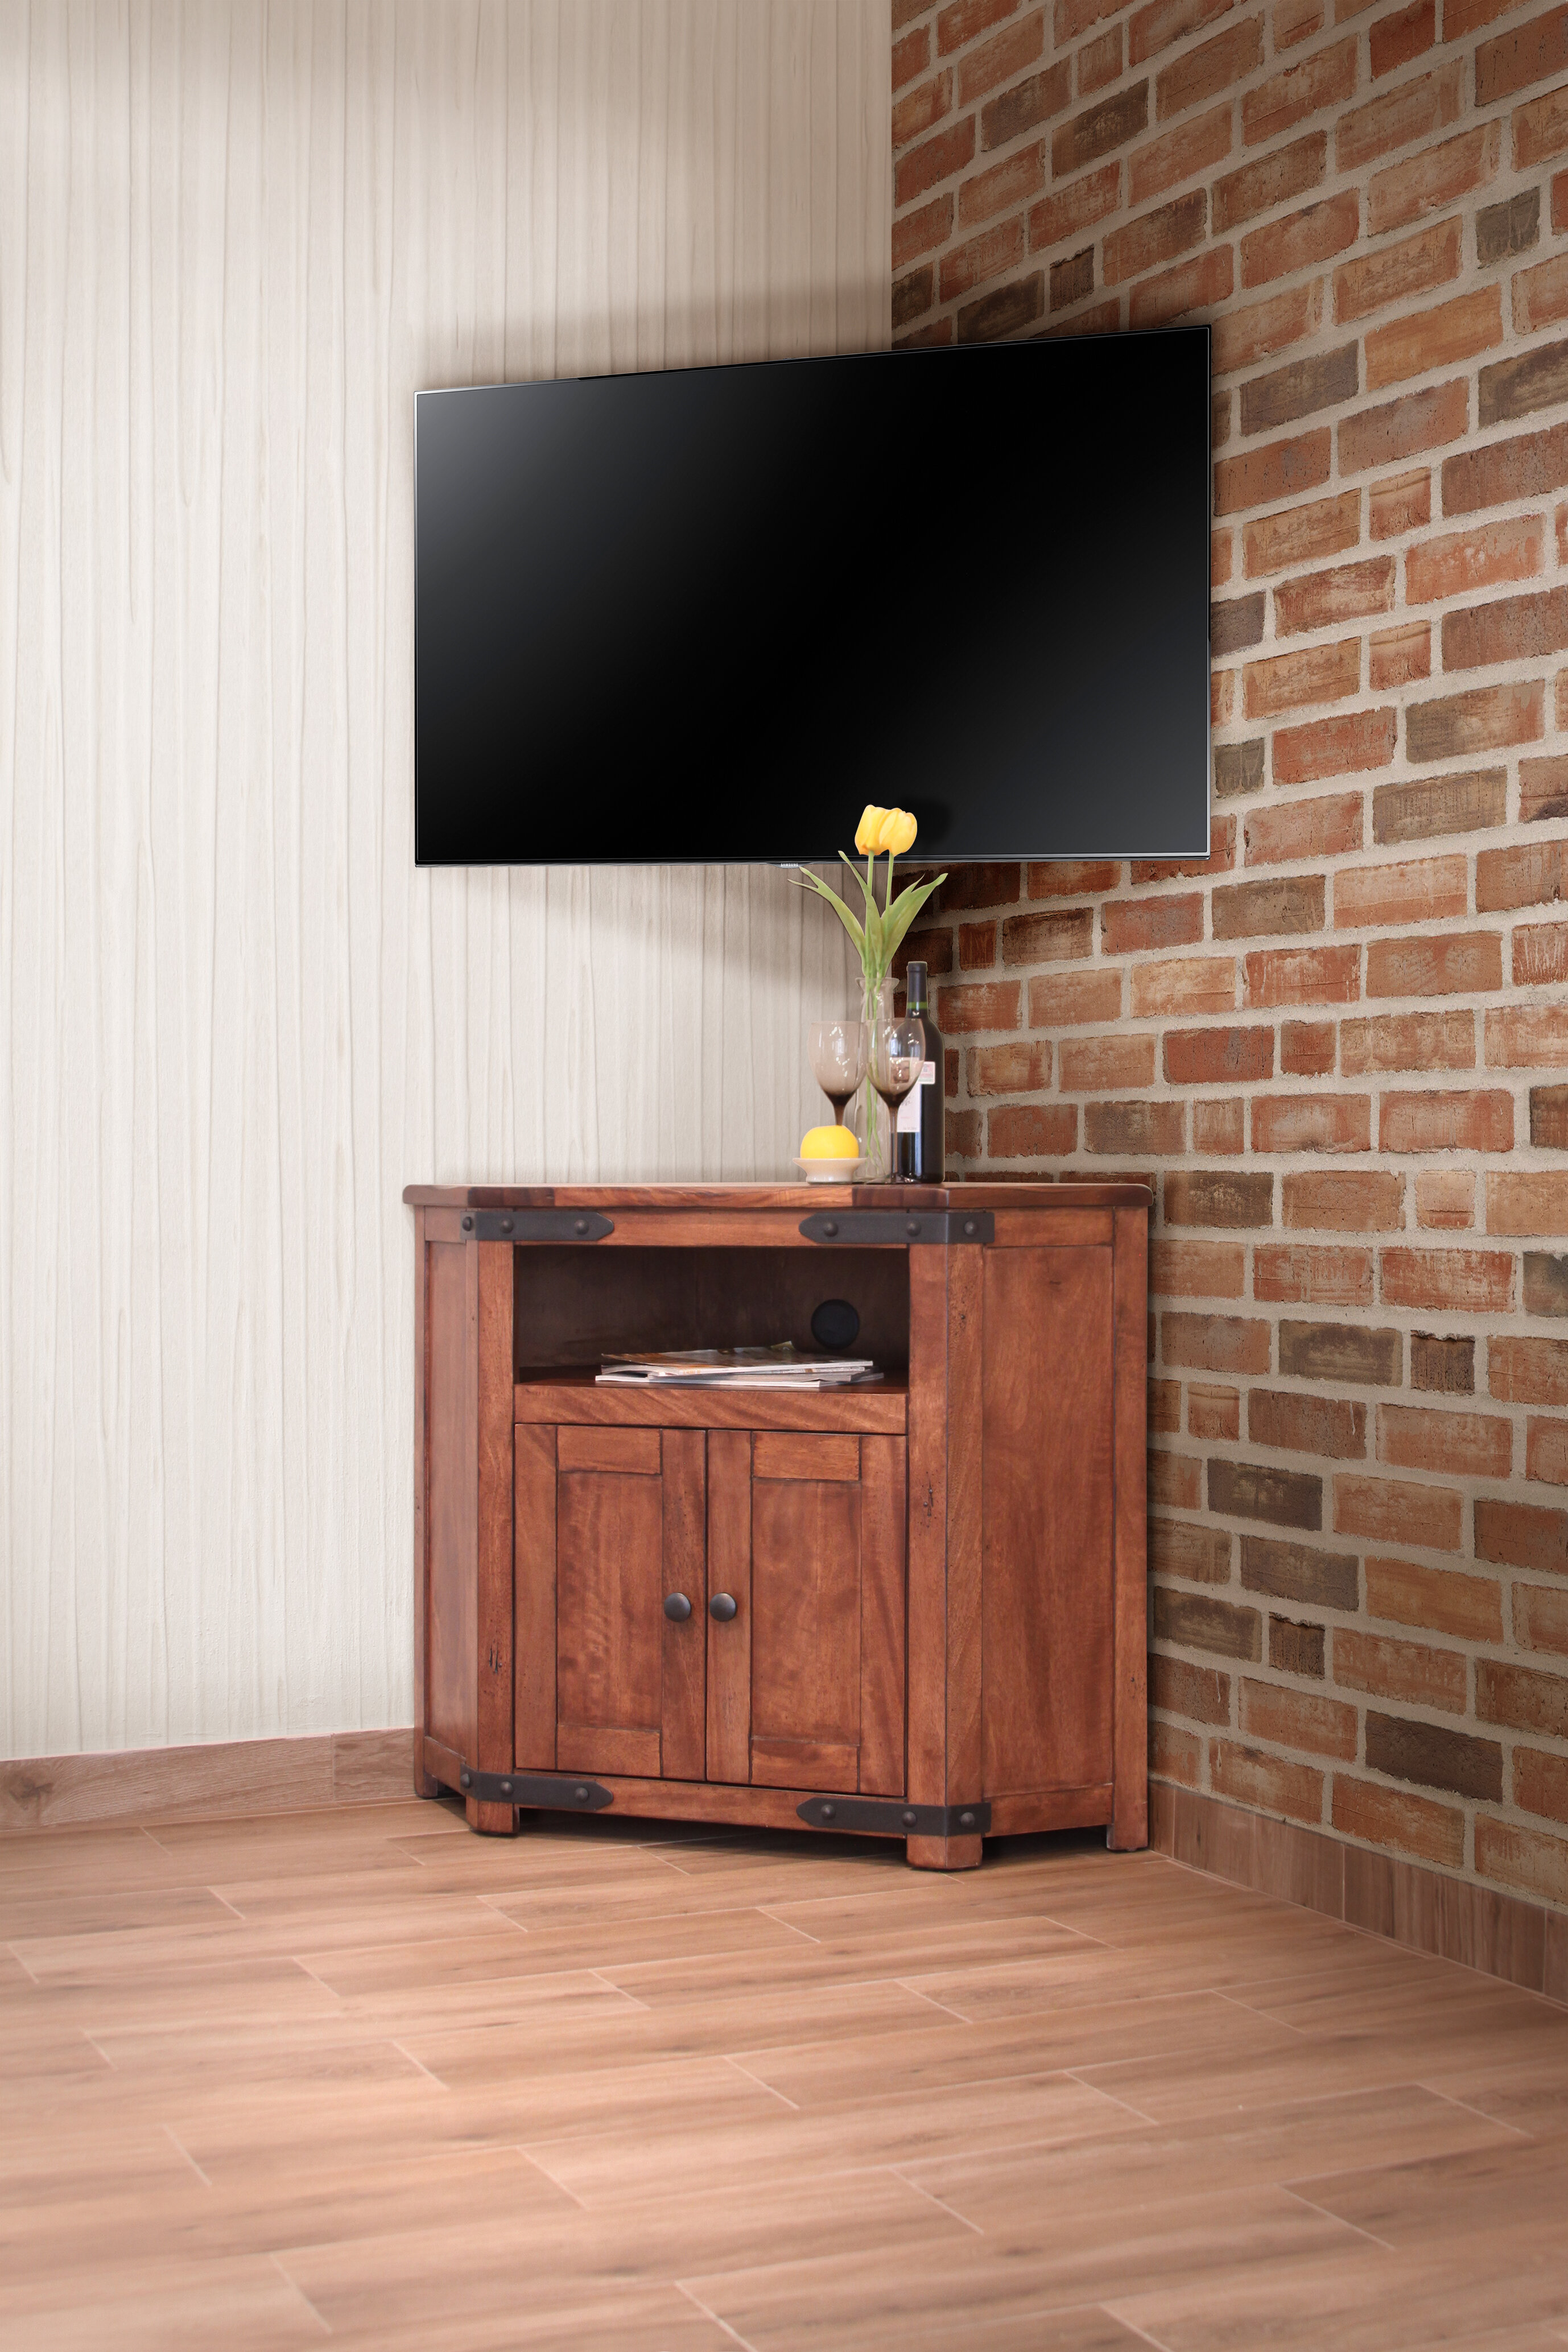 Millwood Pines Cohasset Corner Tv Stand For Tvs Up To 48 Reviews Wayfair